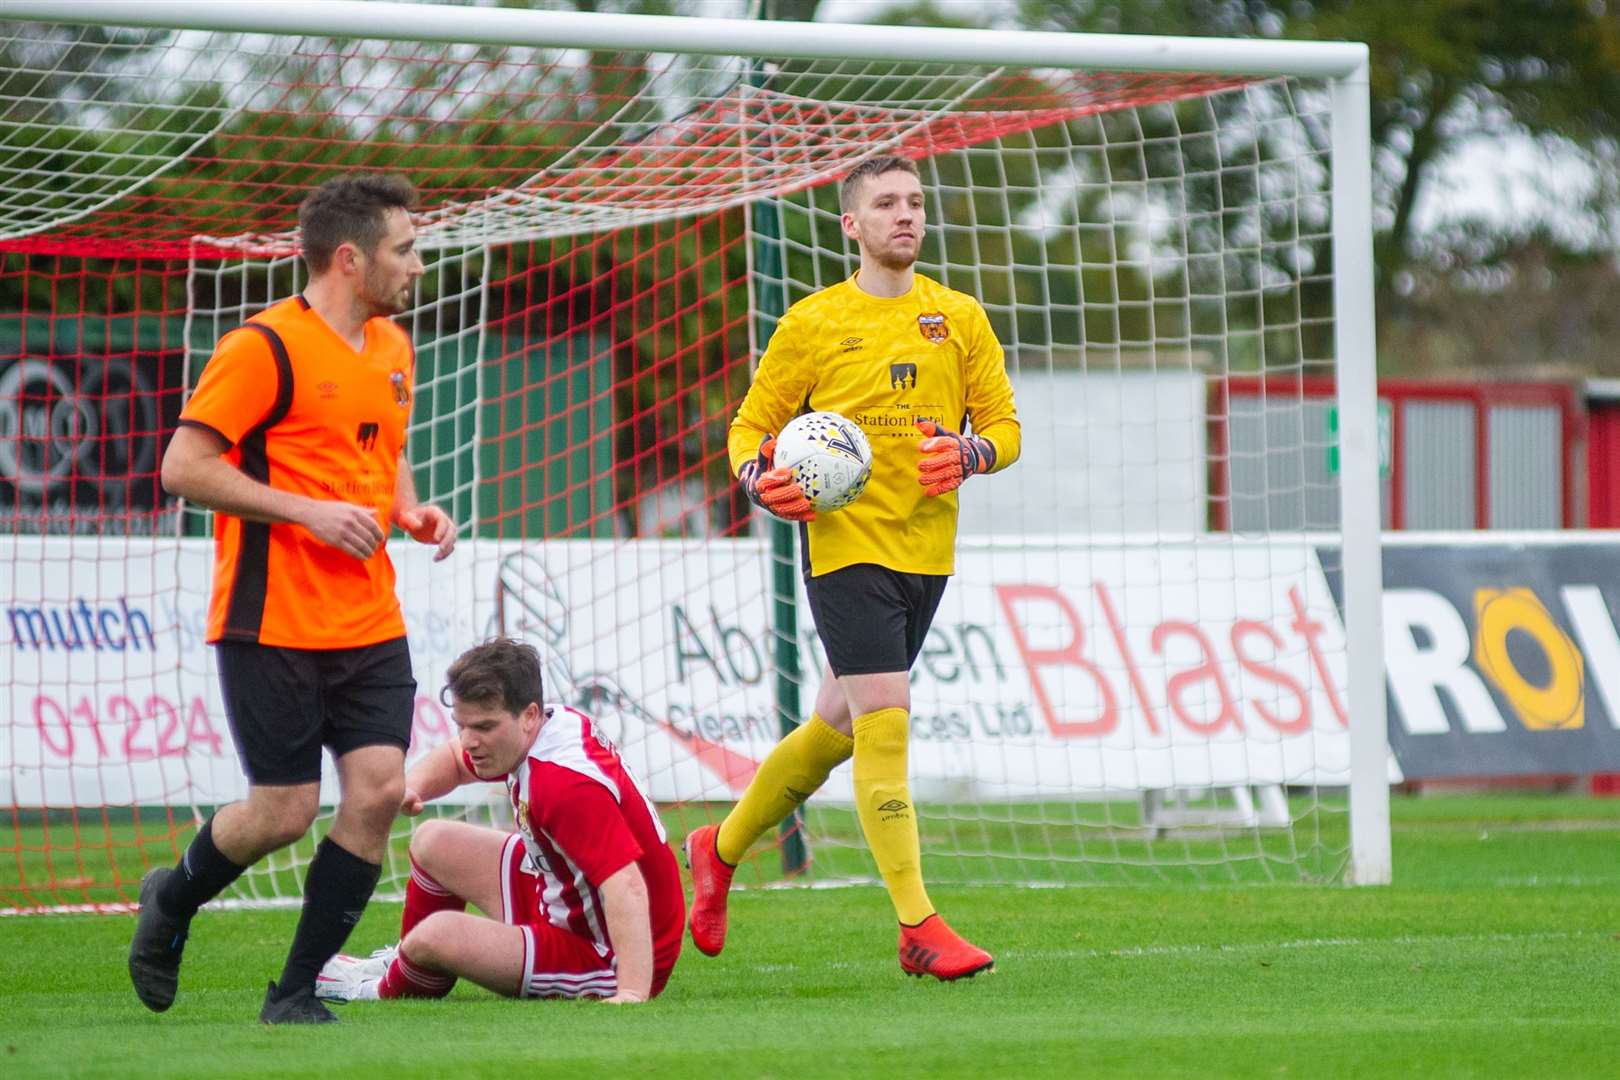 Rothes keeper Sean McCarthy was helpless in preventing Dan Orsi's late winner on Saturday. Picture: Daniel Forsyth.